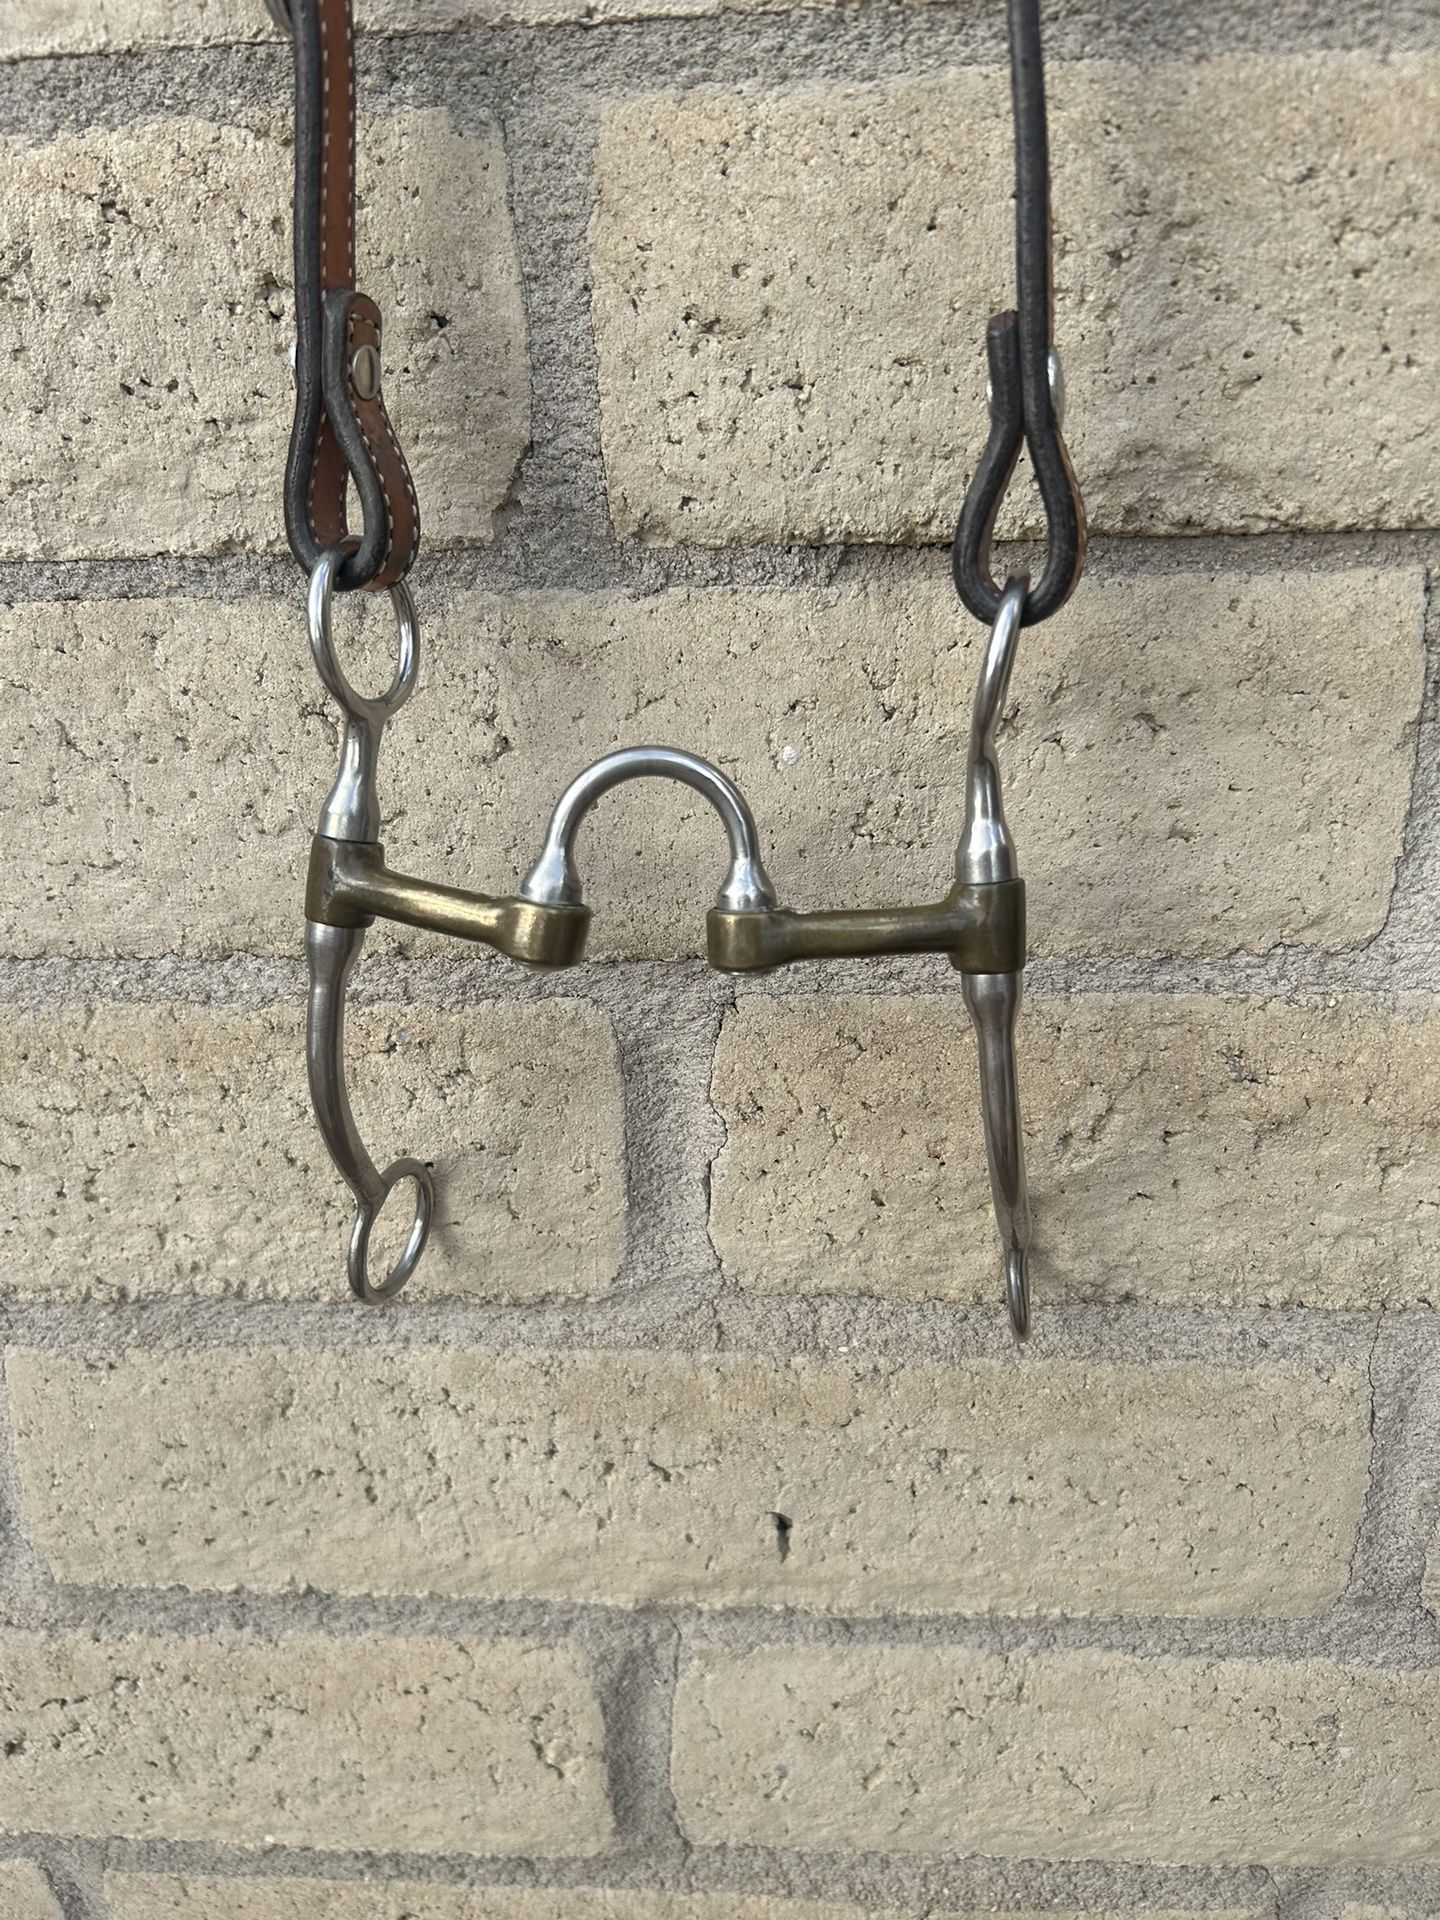 Western Show Bridle And Bit